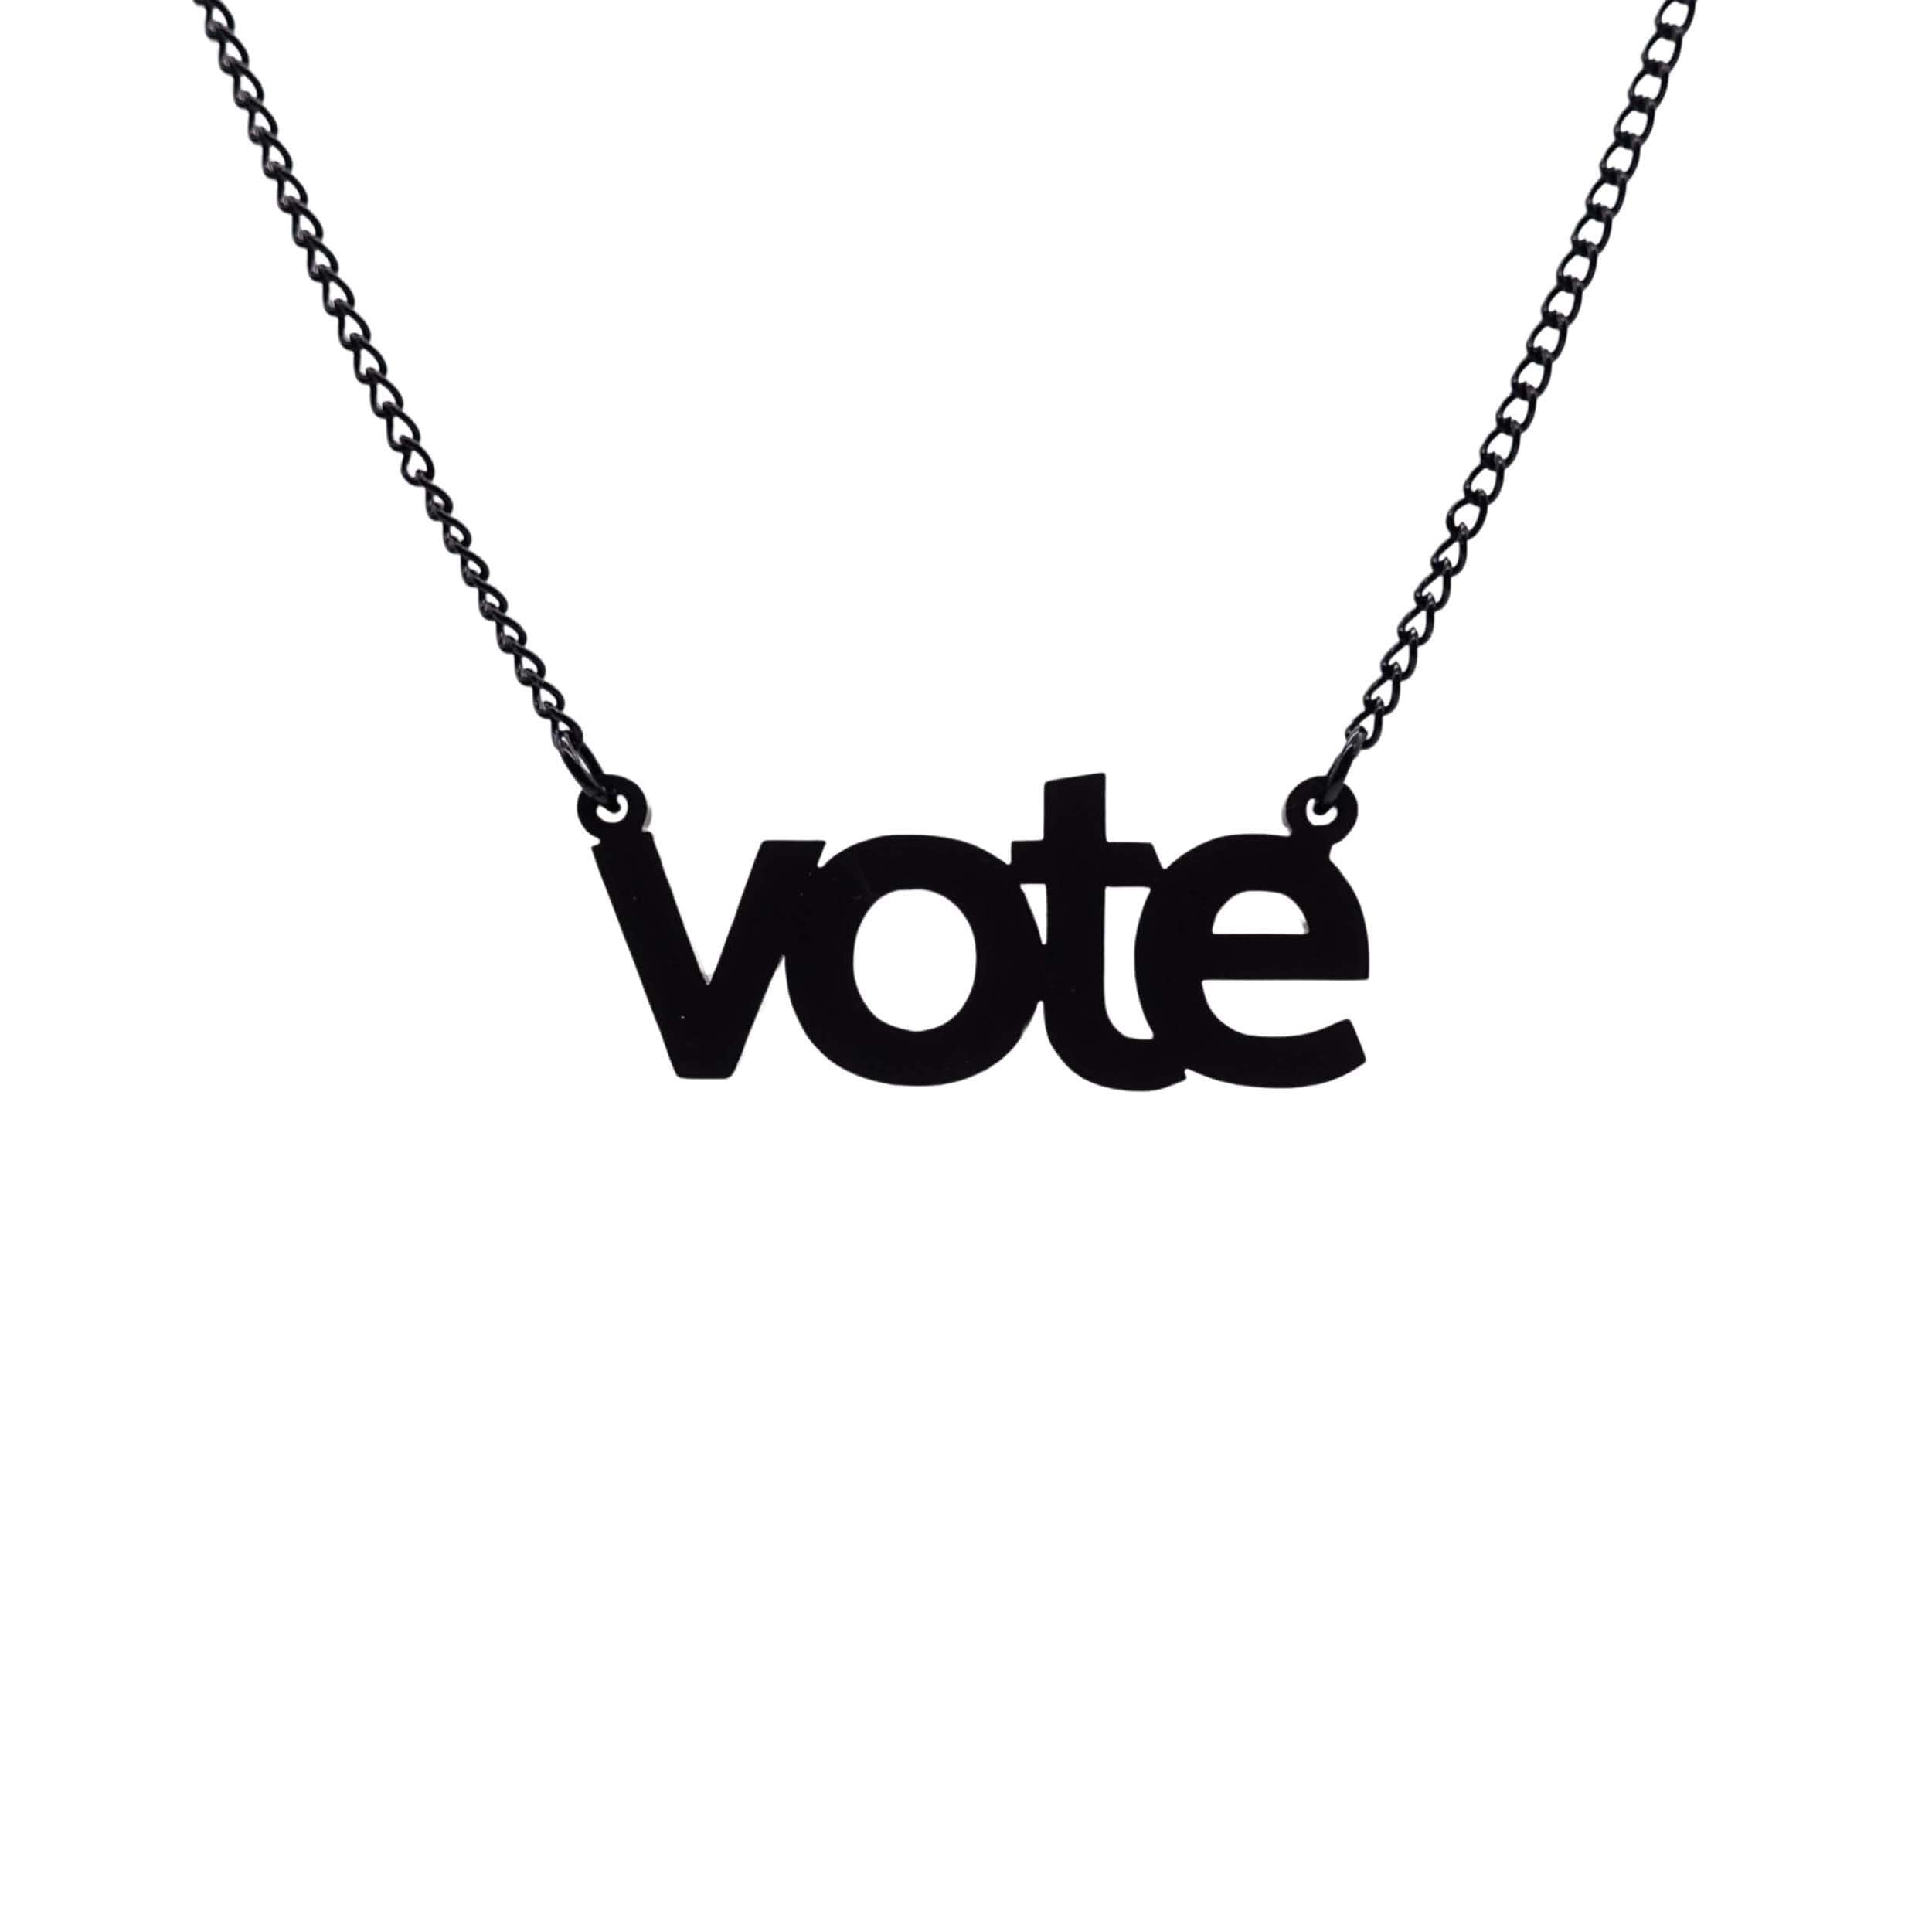 Vote necklace in matte black shown hanging against a white background. 